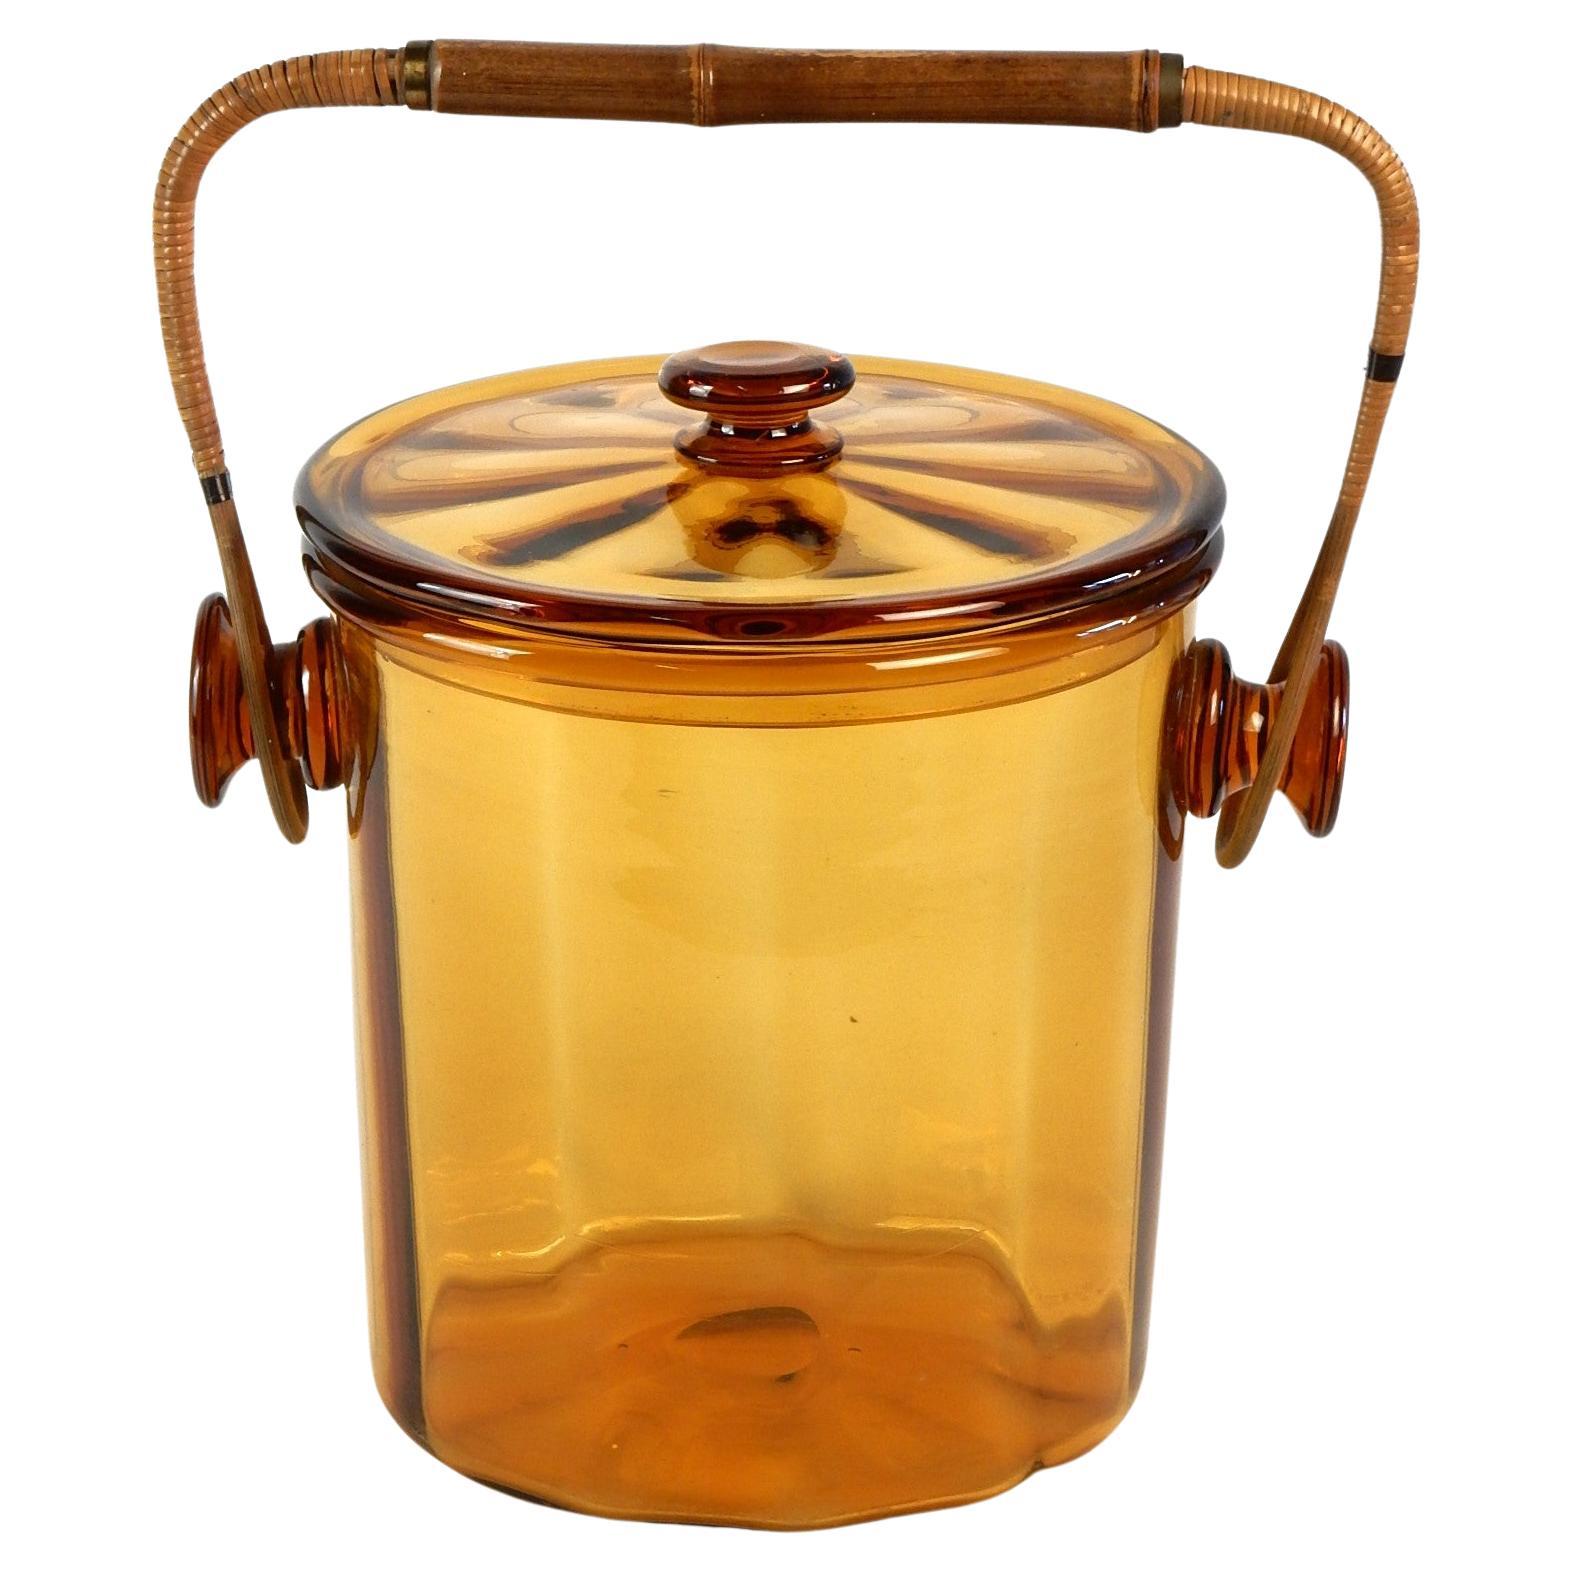 Exquisite art glass lidded ice bucket with rattan handle wrapped in cane.
Gorgeous honey colored glass. Large piece measuring 12in X 11in (inside 9-1/2in tall X 8.50in wide). 
Not signed. From a modernist 1960's estate with many Austrian and French